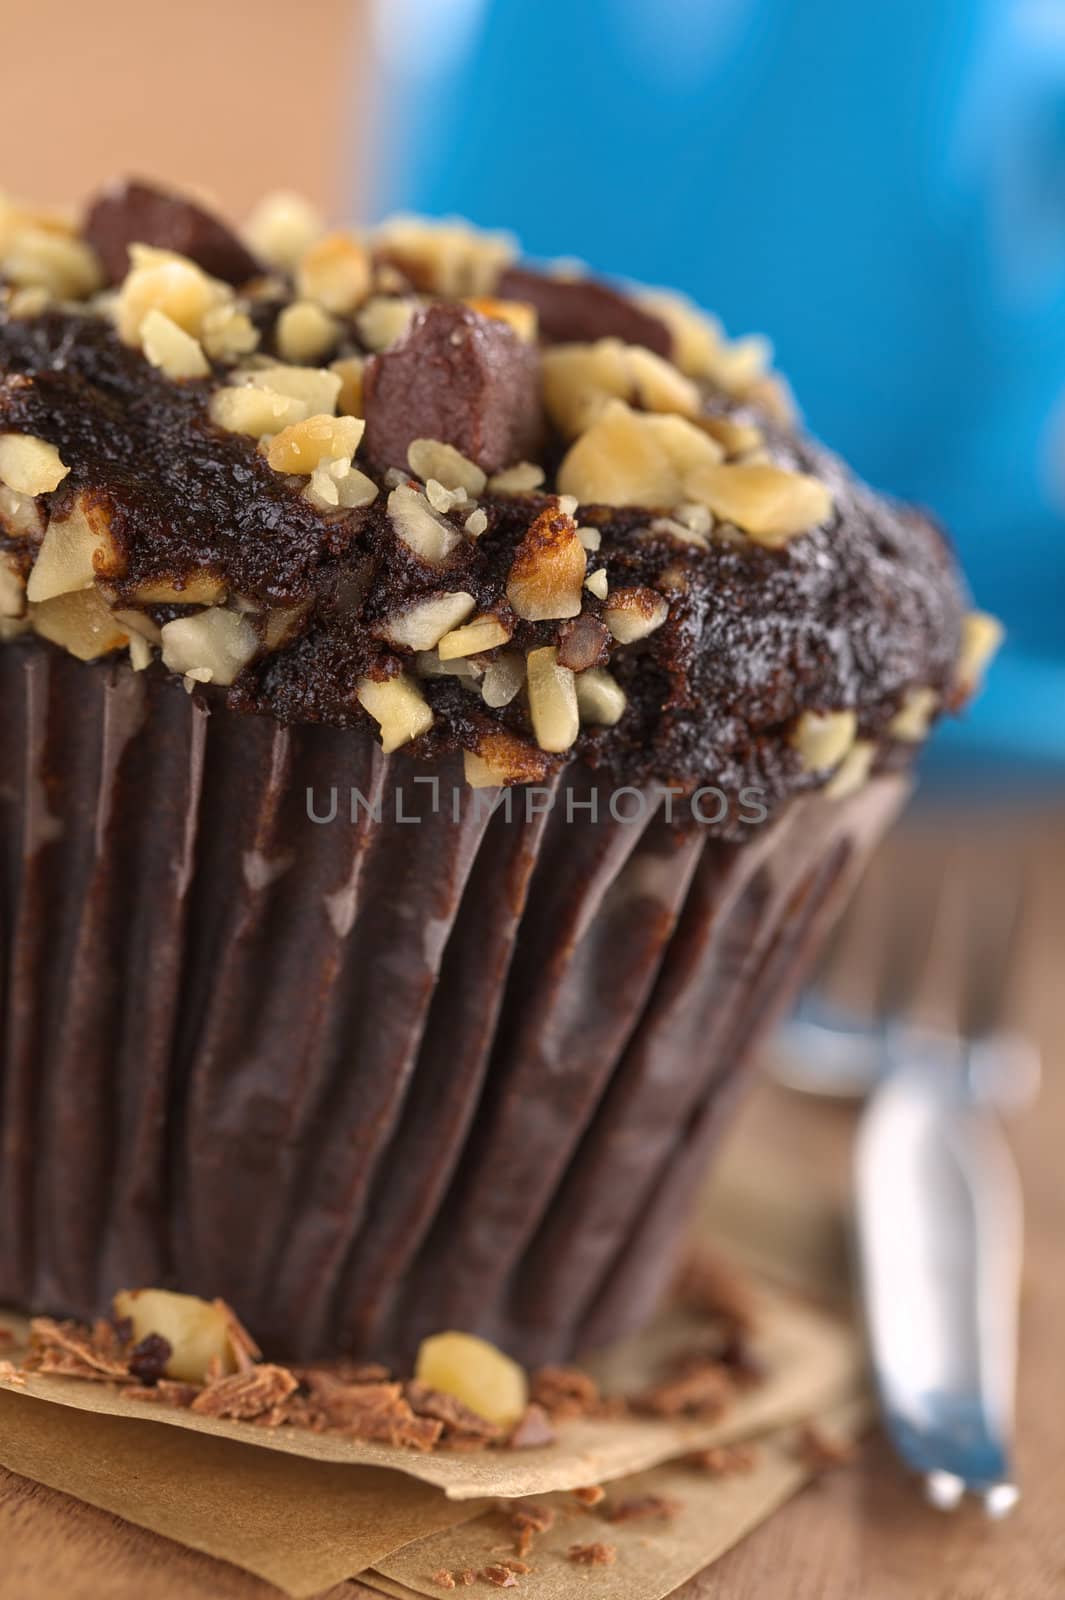 Chocolate-walnut muffin with coffee cup in the back (Selective Focus, Focus on the front edge of the muffin) 